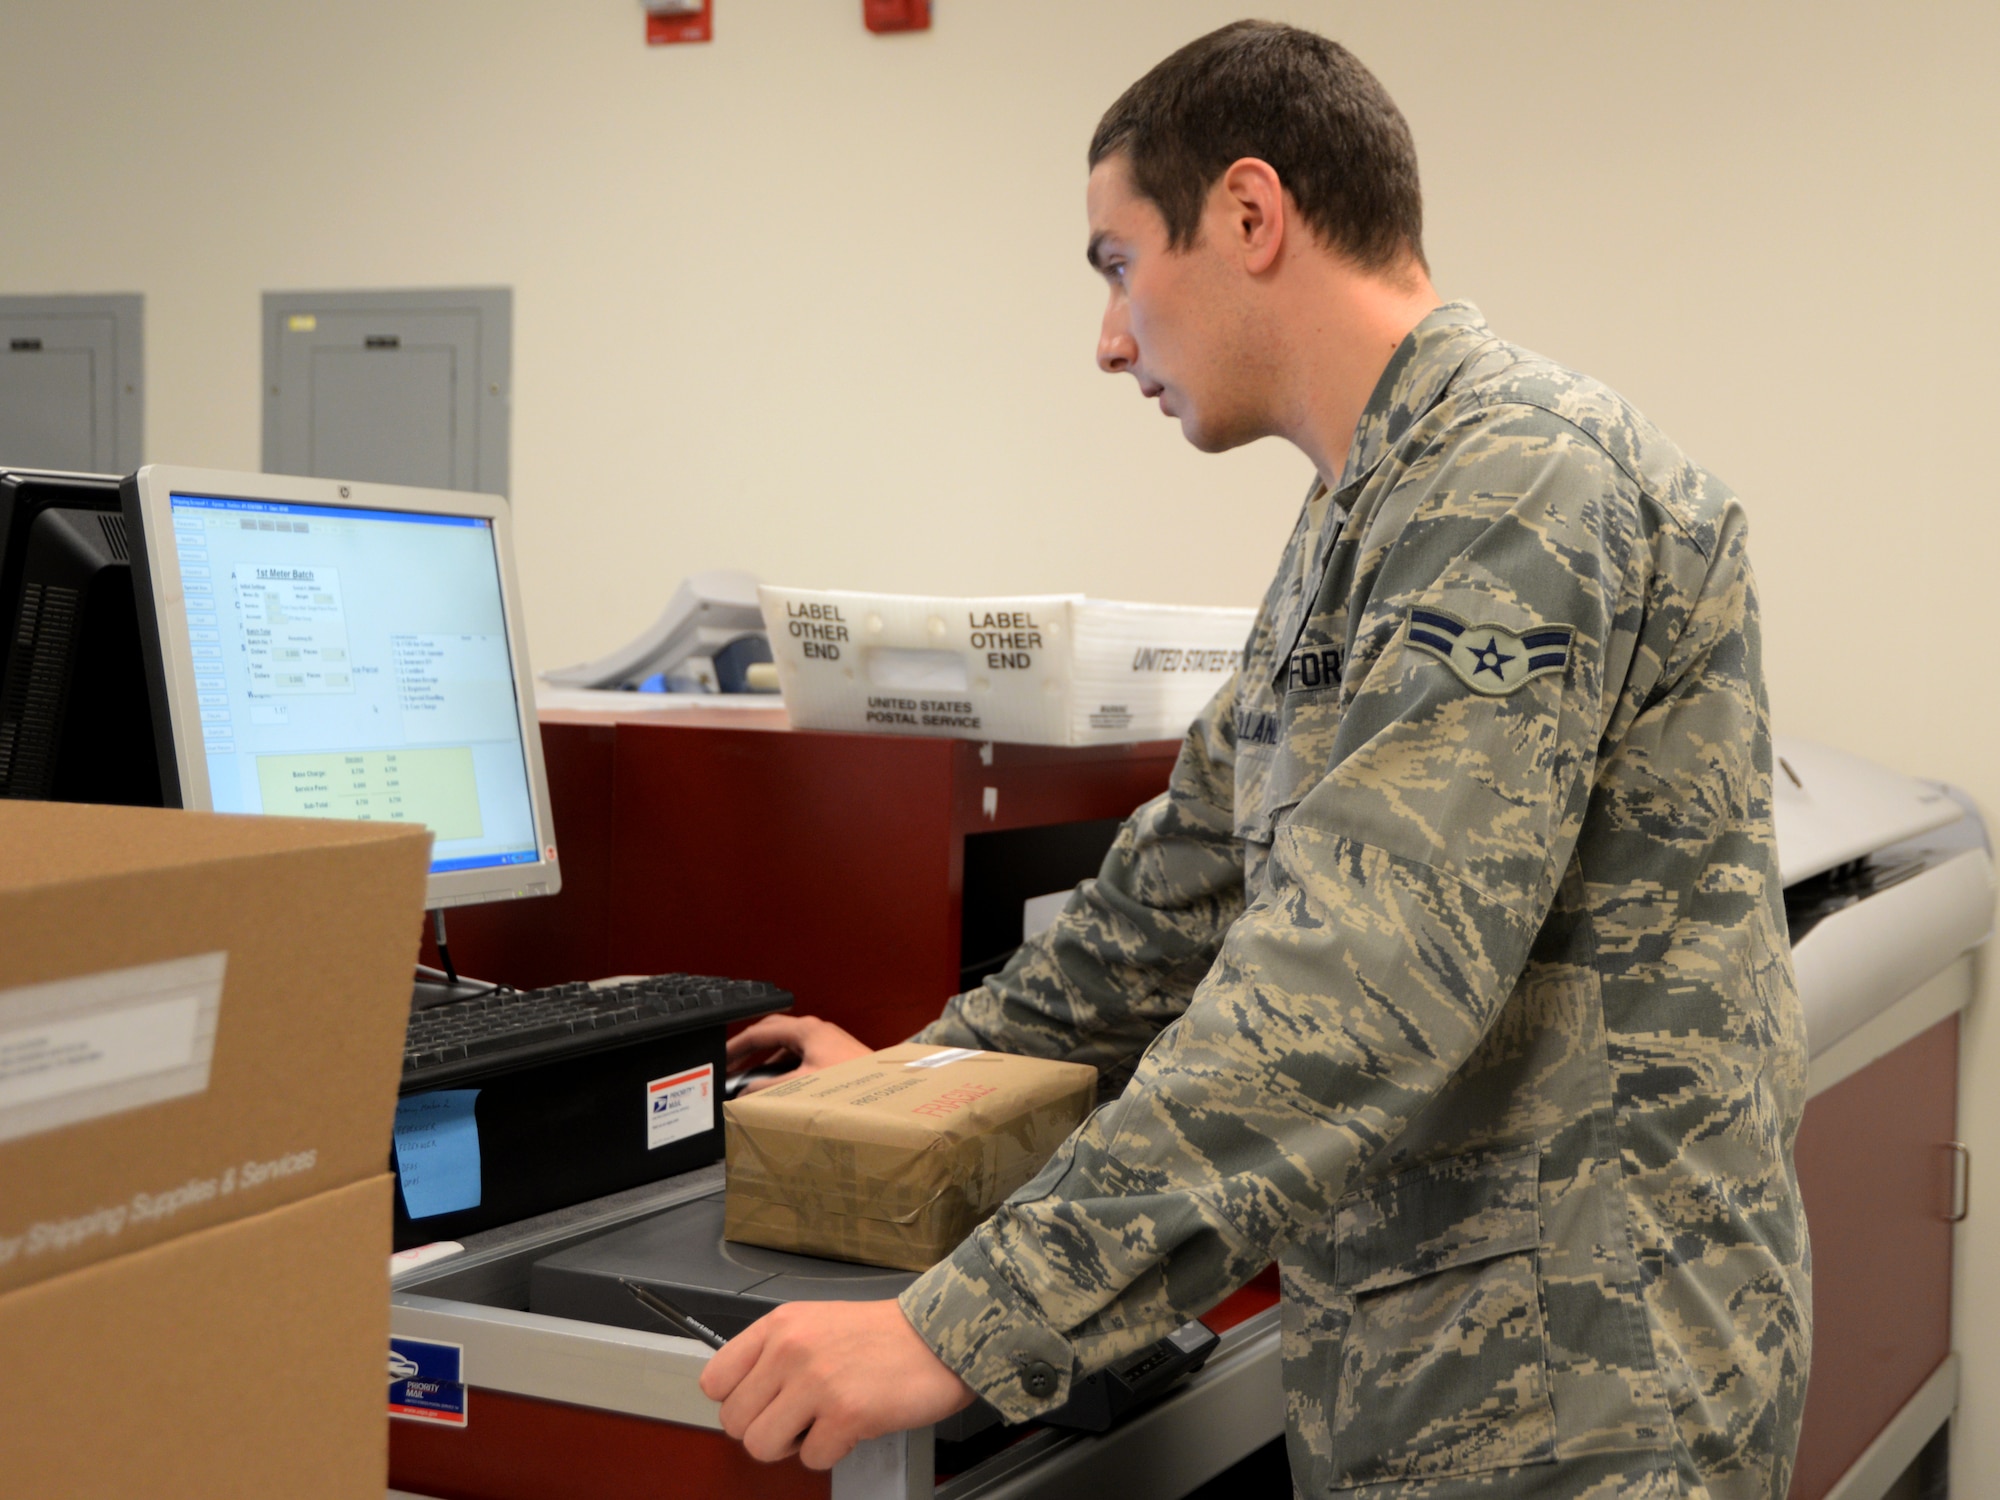 Airman 1st Class Ryan Holland, postal apprentice, prepares a consolidated package June 24, 2015, Scott Air Force Base, Illinois. Holland was one of the Airmen that helped streamline the program helping save the official mail center money. (U.S. Air Force photo by Airman 1st Class Melissa Estevez)